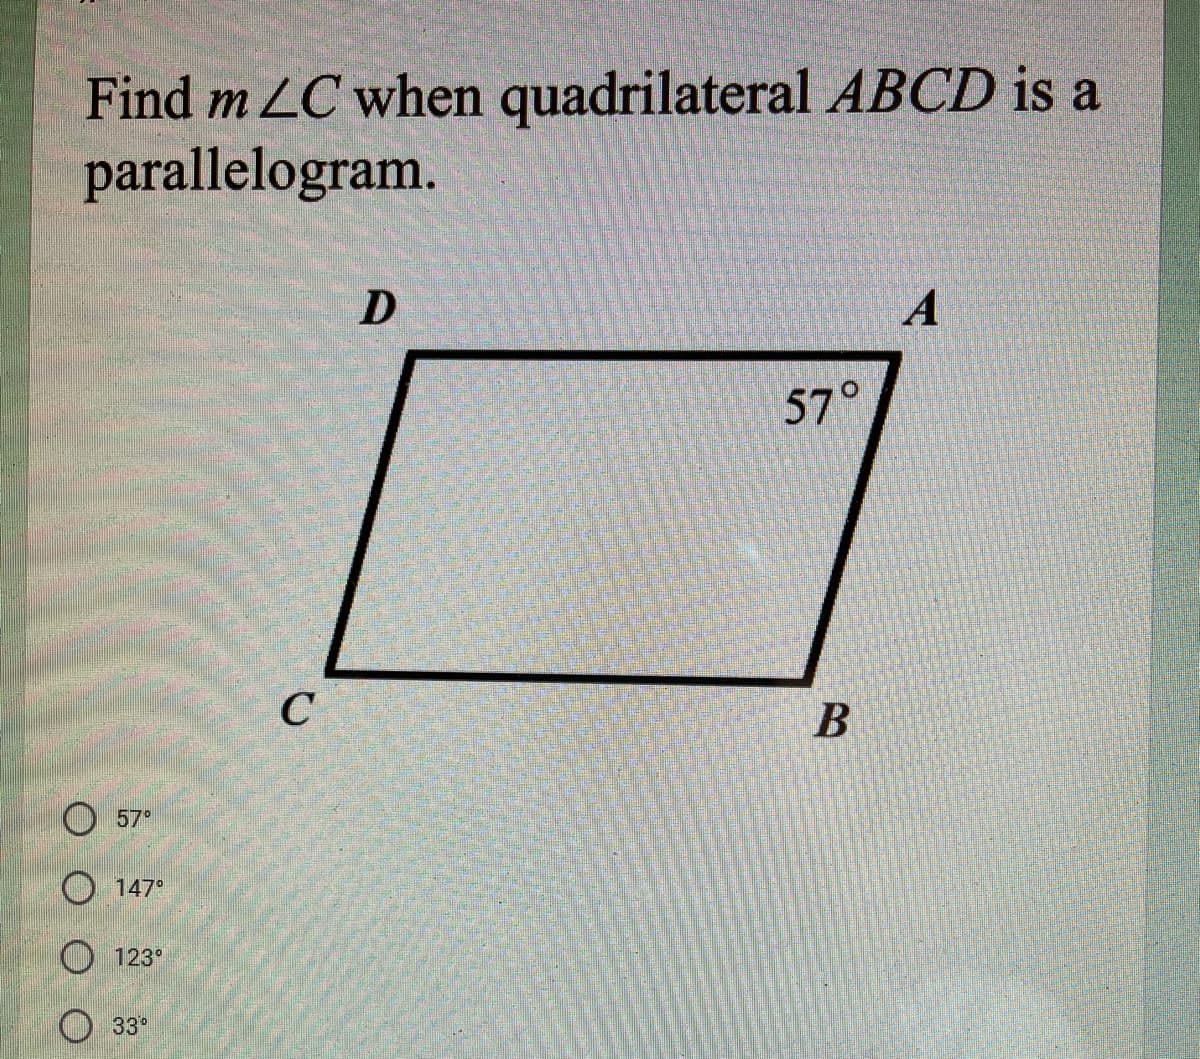 Find m LC when quadrilateral ABCD is a
parallelogram.
57°
O 57°
O 147°
O 123°
33
